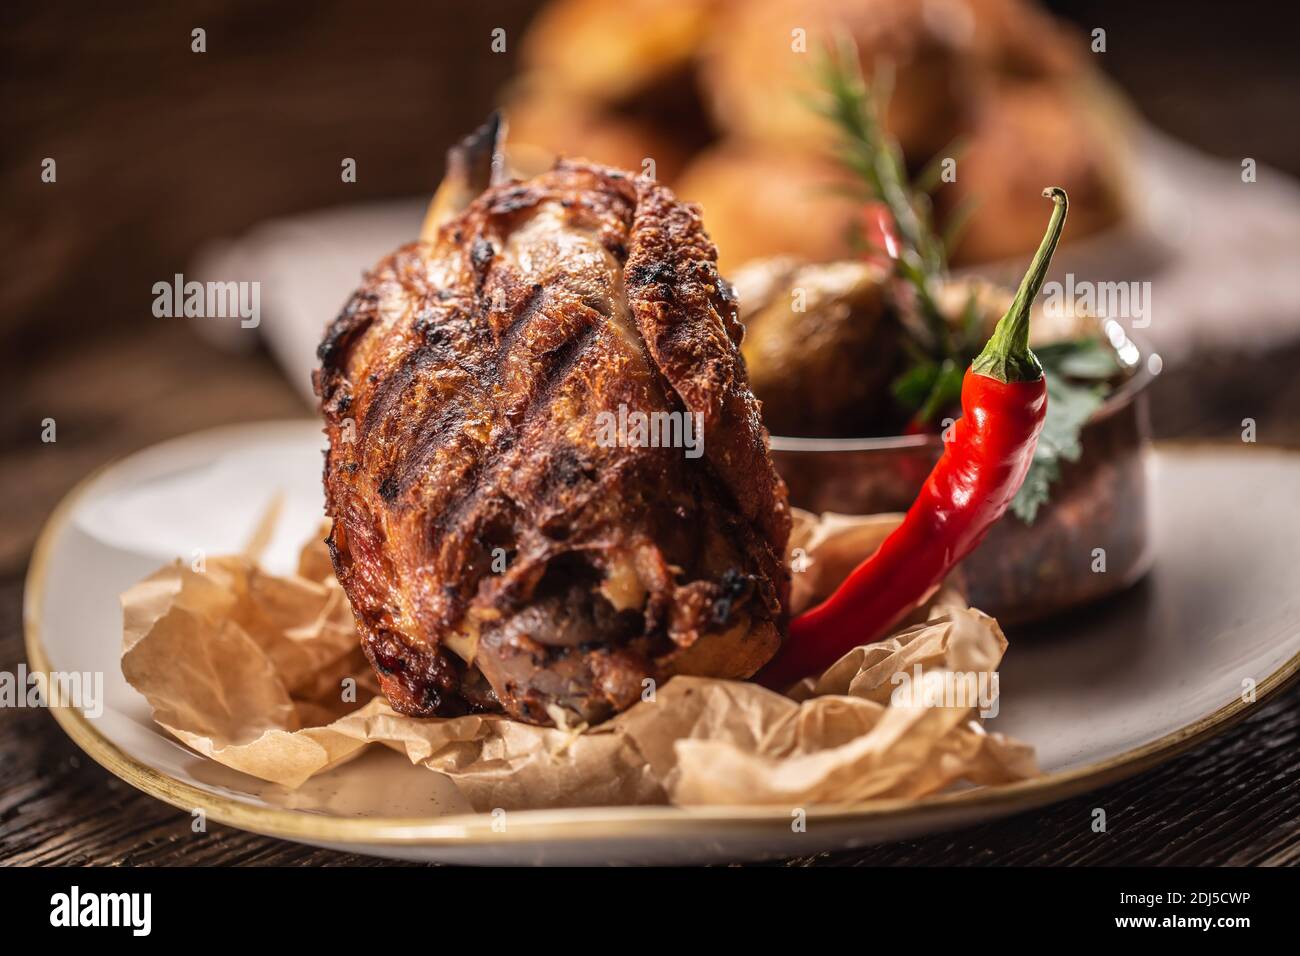 German pork knuckle served with chilli and baked potatoes. Stock Photo